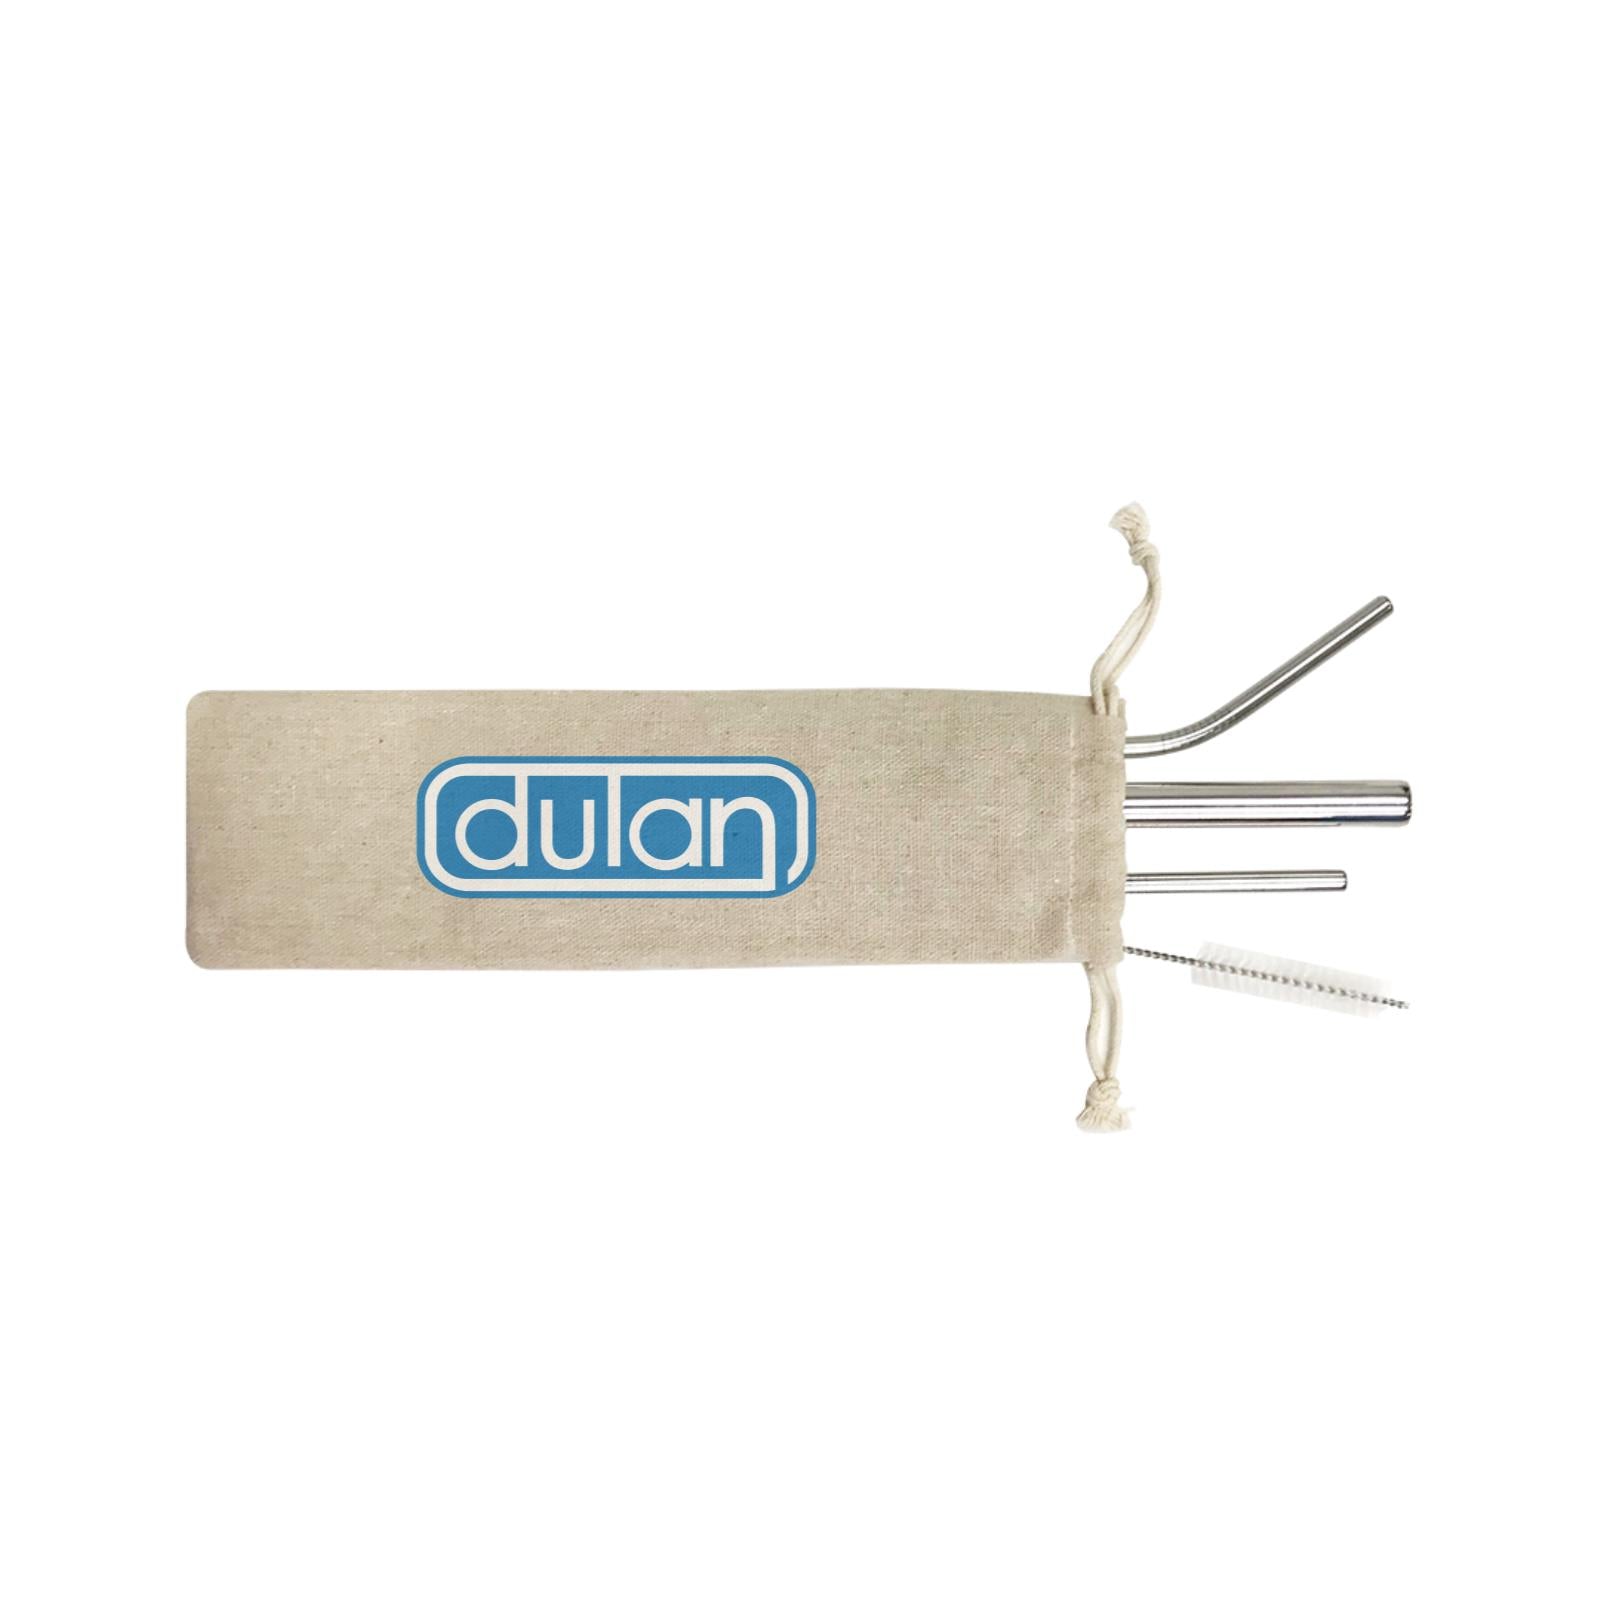 Slang Statement dulan 4-in-1 Stainless Steel Straw Set In a Satchel